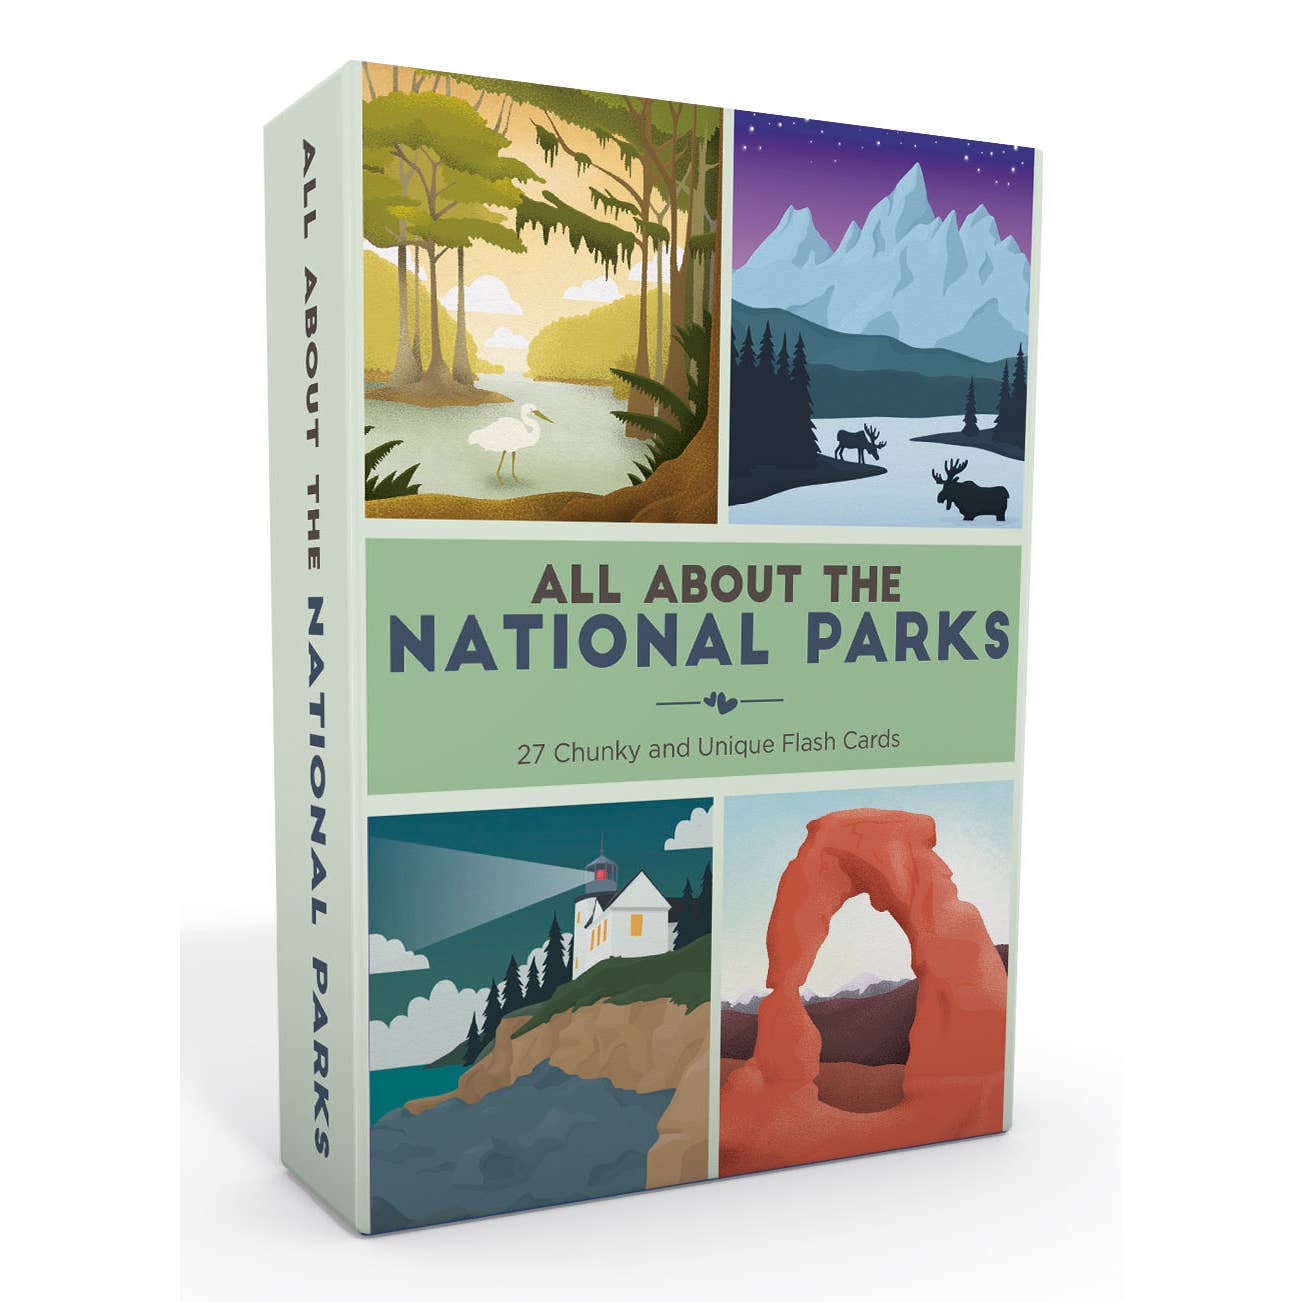 All About the National Parks